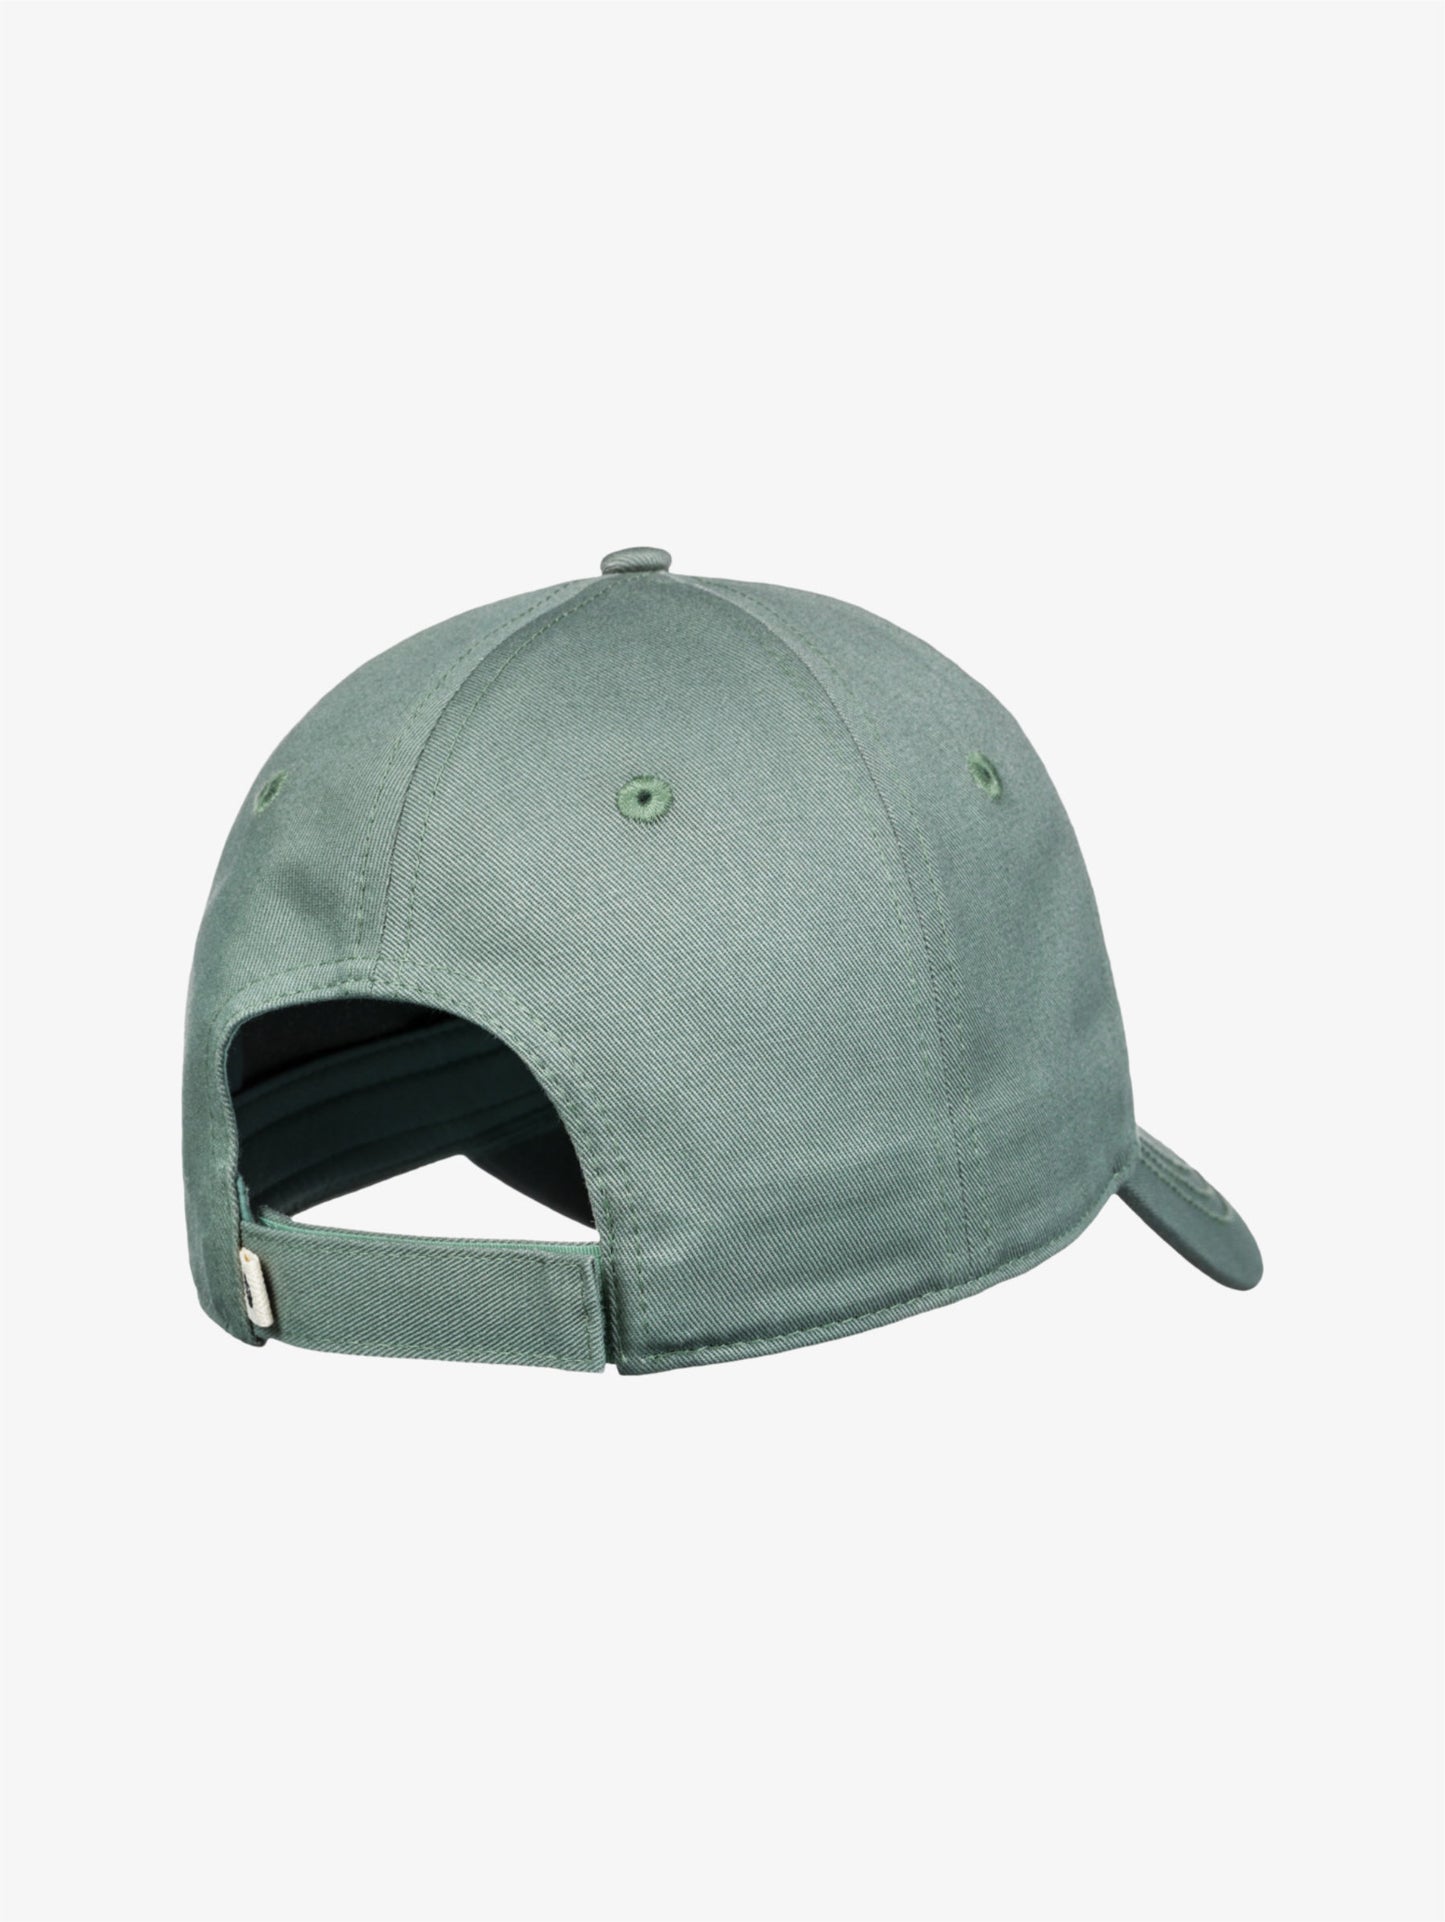 Extra Innings Color women's hat agave green